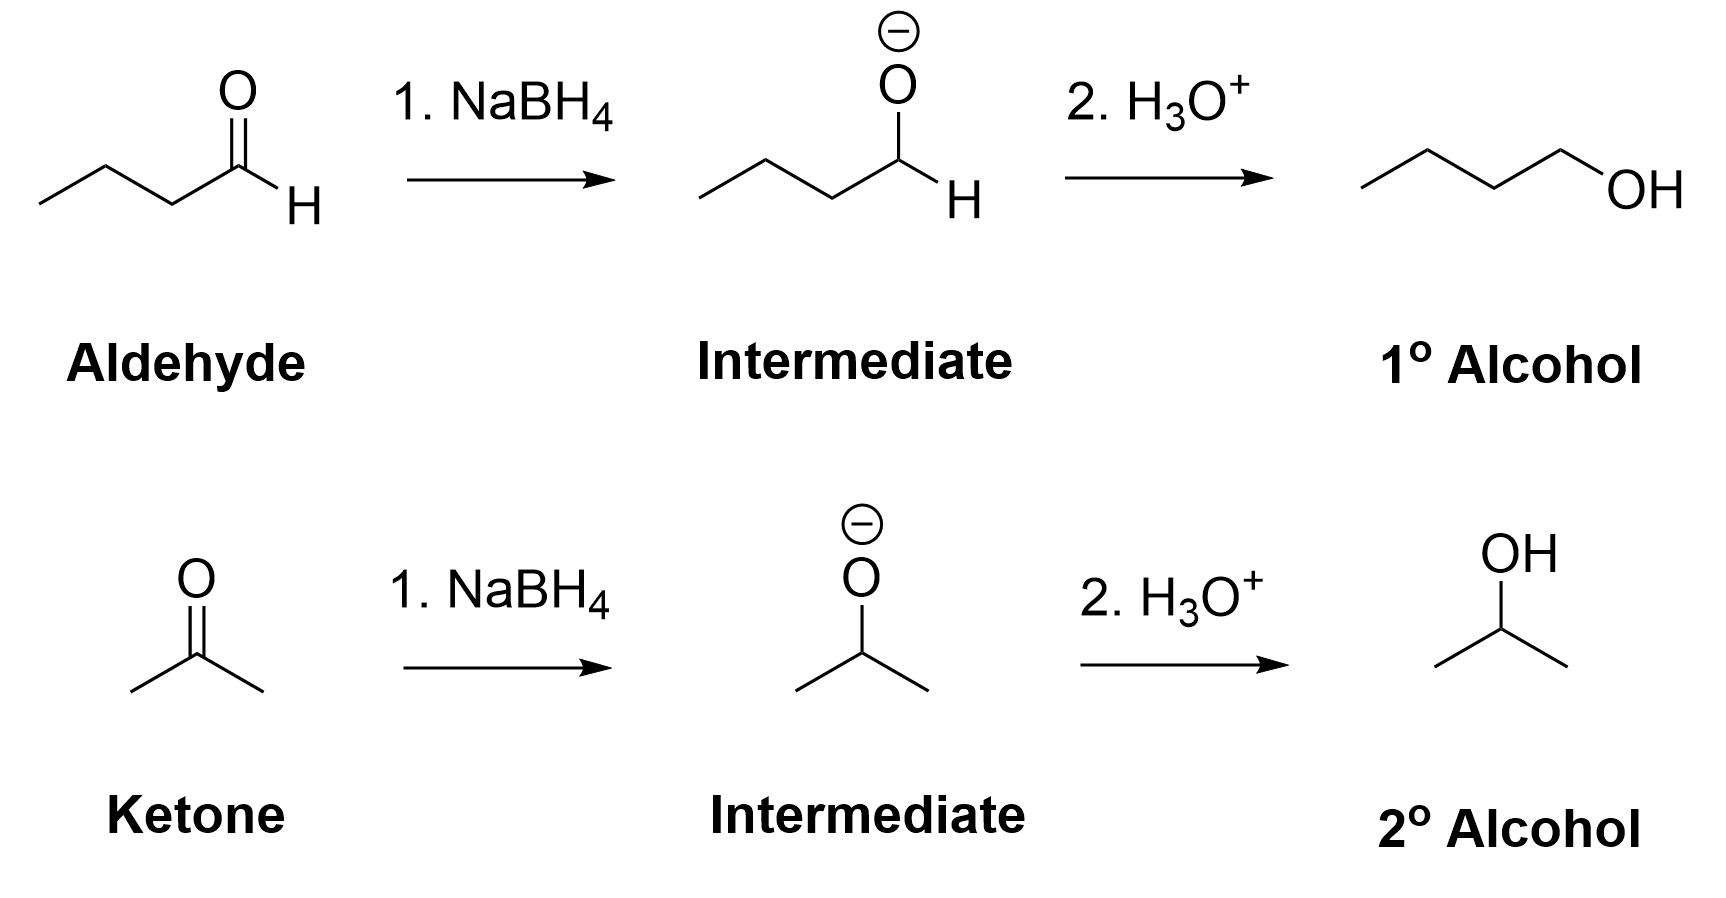 Aldehydes and ketones reacting with NaBH4 forming alkoxide intermediates, then reacting with acid such as H3O+ to form primary and secondary alcohols respectively.